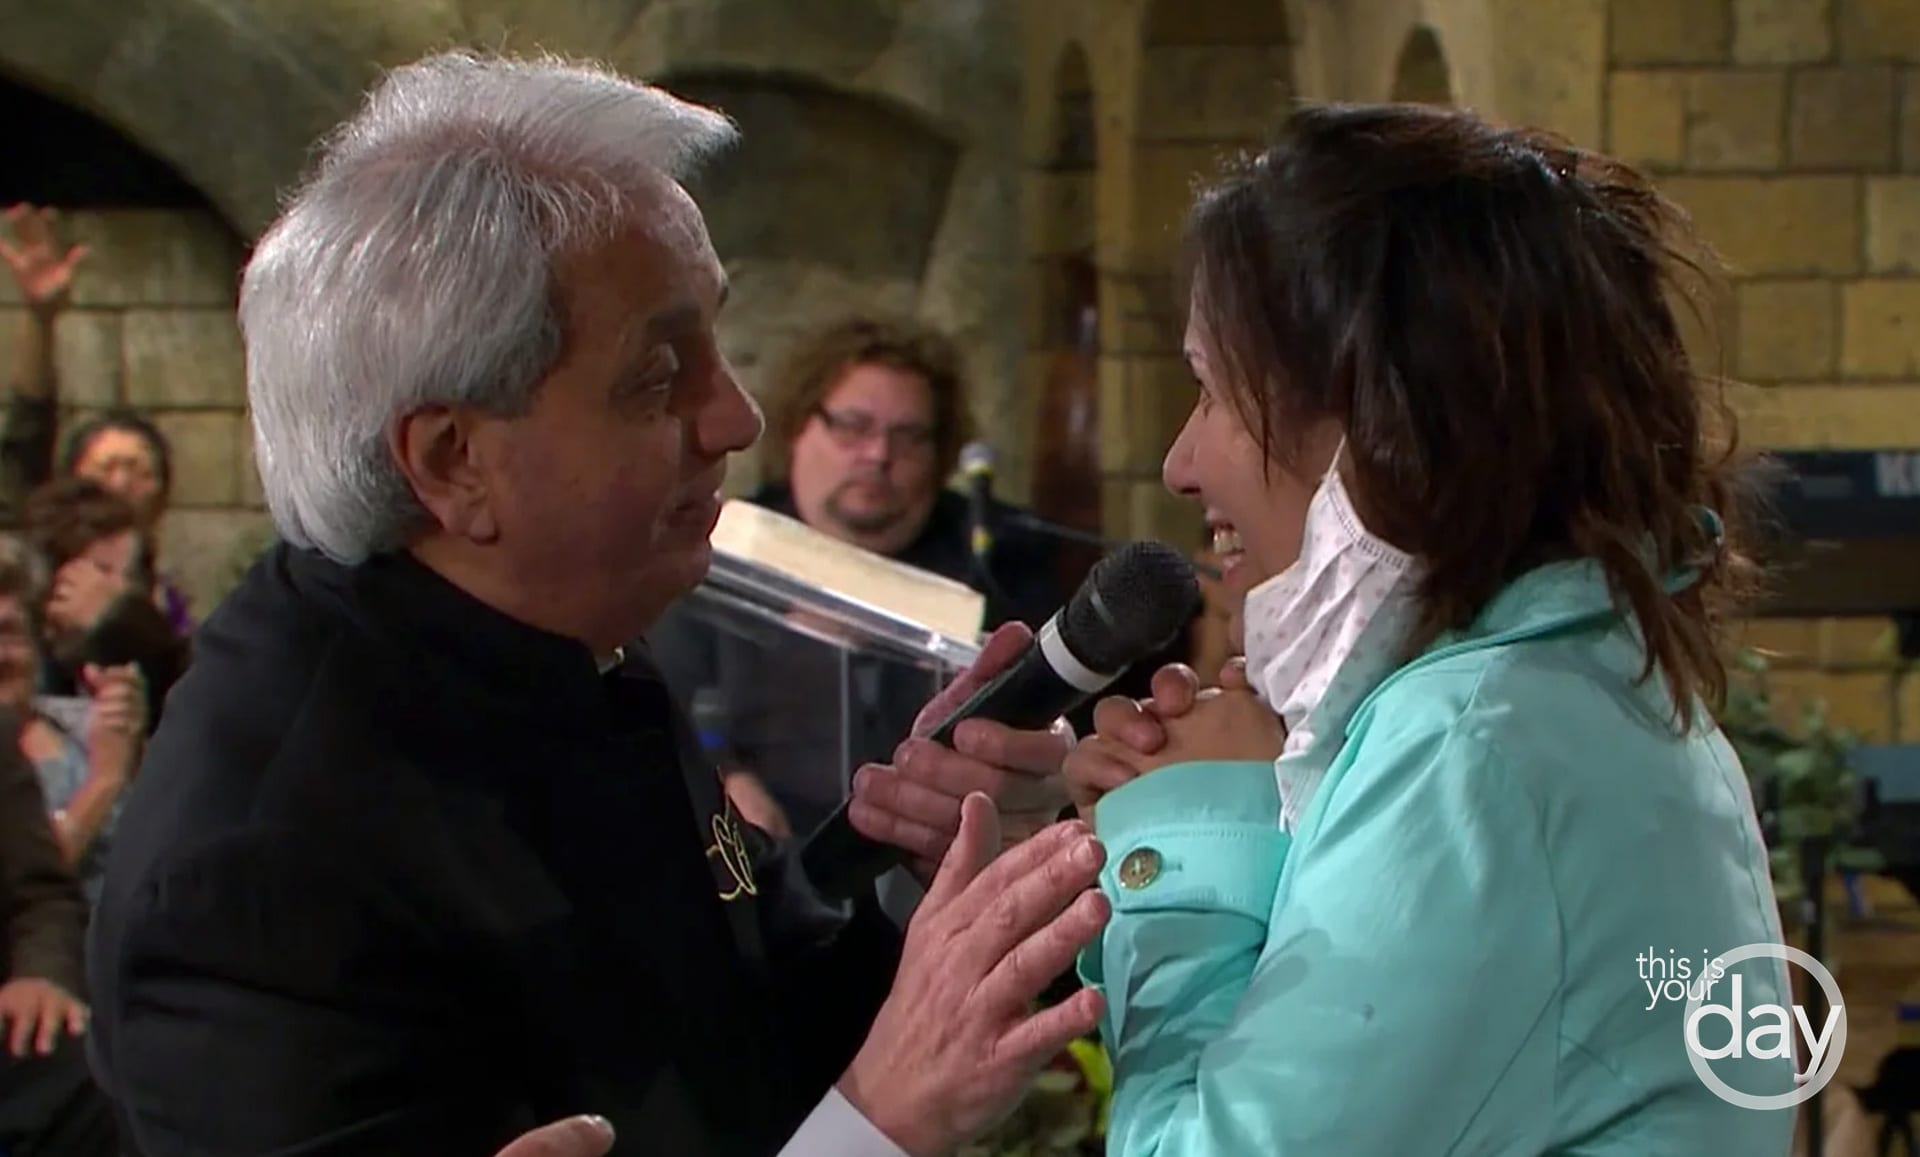 Night of Amazing Miracles - This Is Your Day - Benny Hinn Ministries